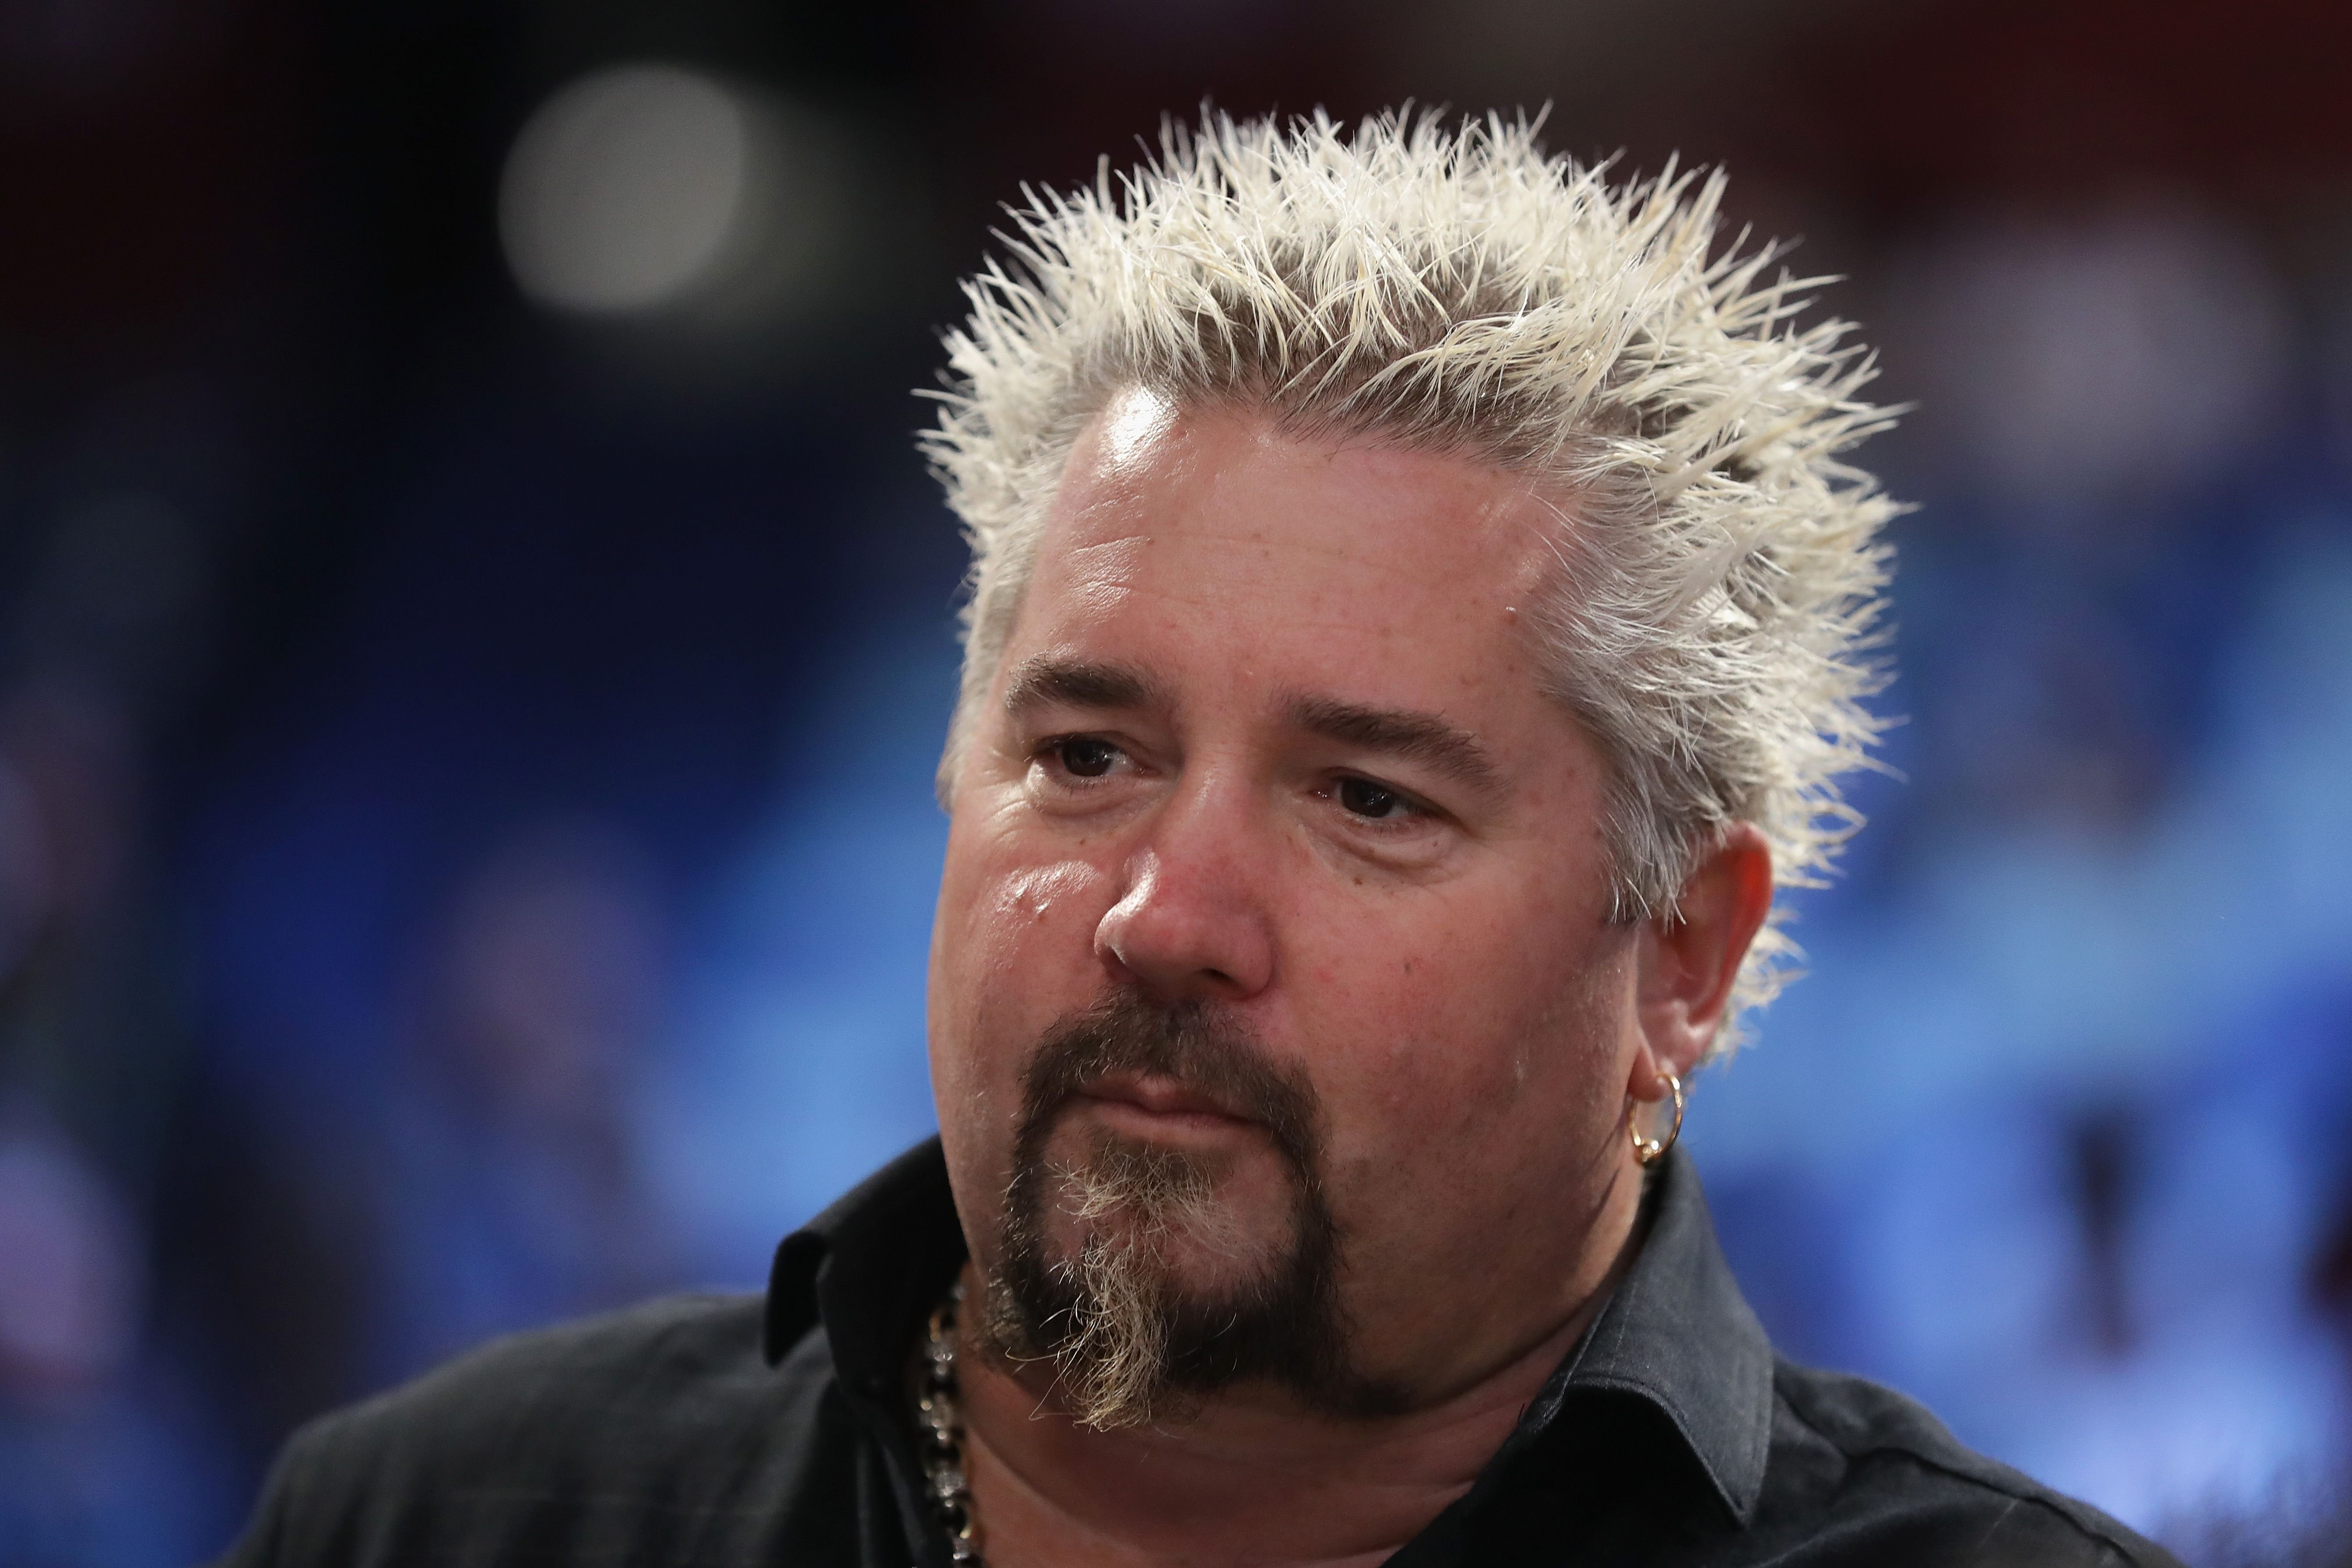 Guy Fieri attends the 2017 Taco Bell Skills Challenge at Smoothie King Center on February 18, 2017 in New Orleans, Louisiana. | Source: Getty Images